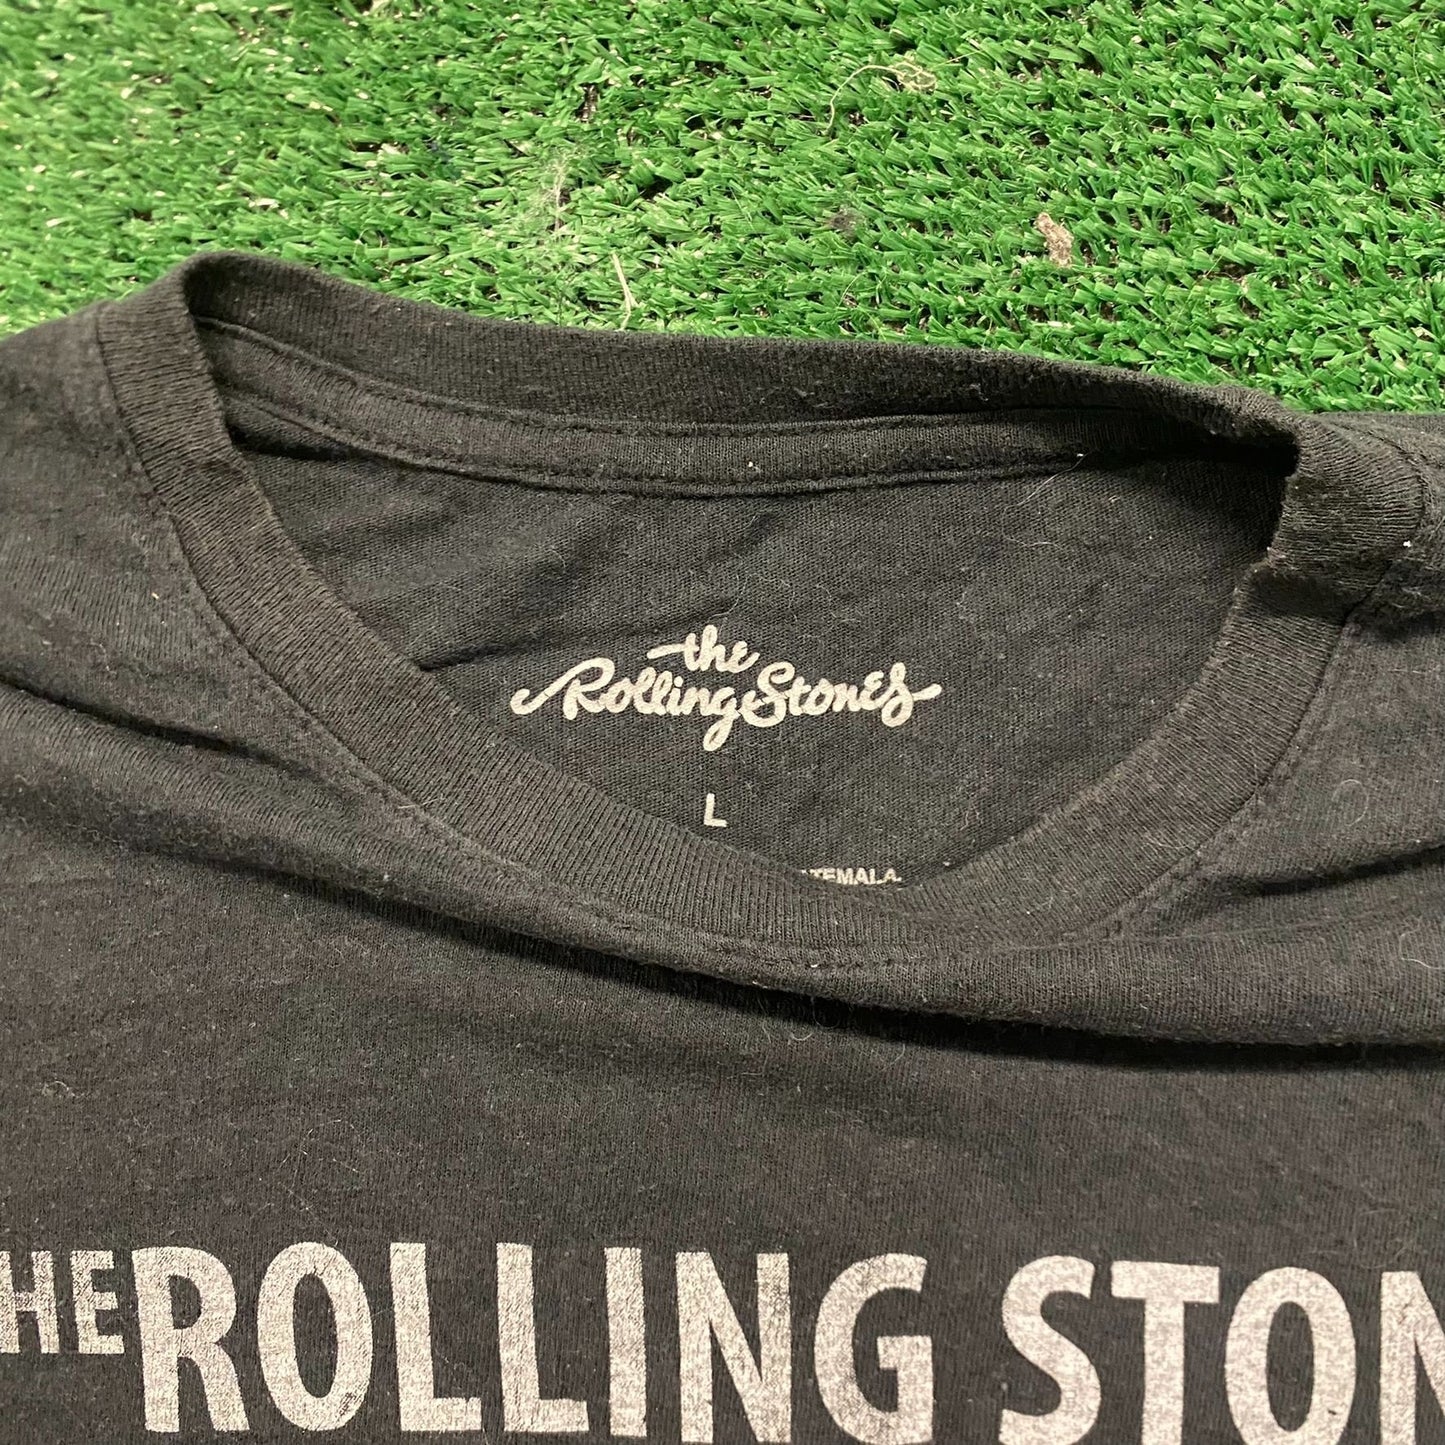 Rolling Stones Lips Vintage Rock Band T-Shirt